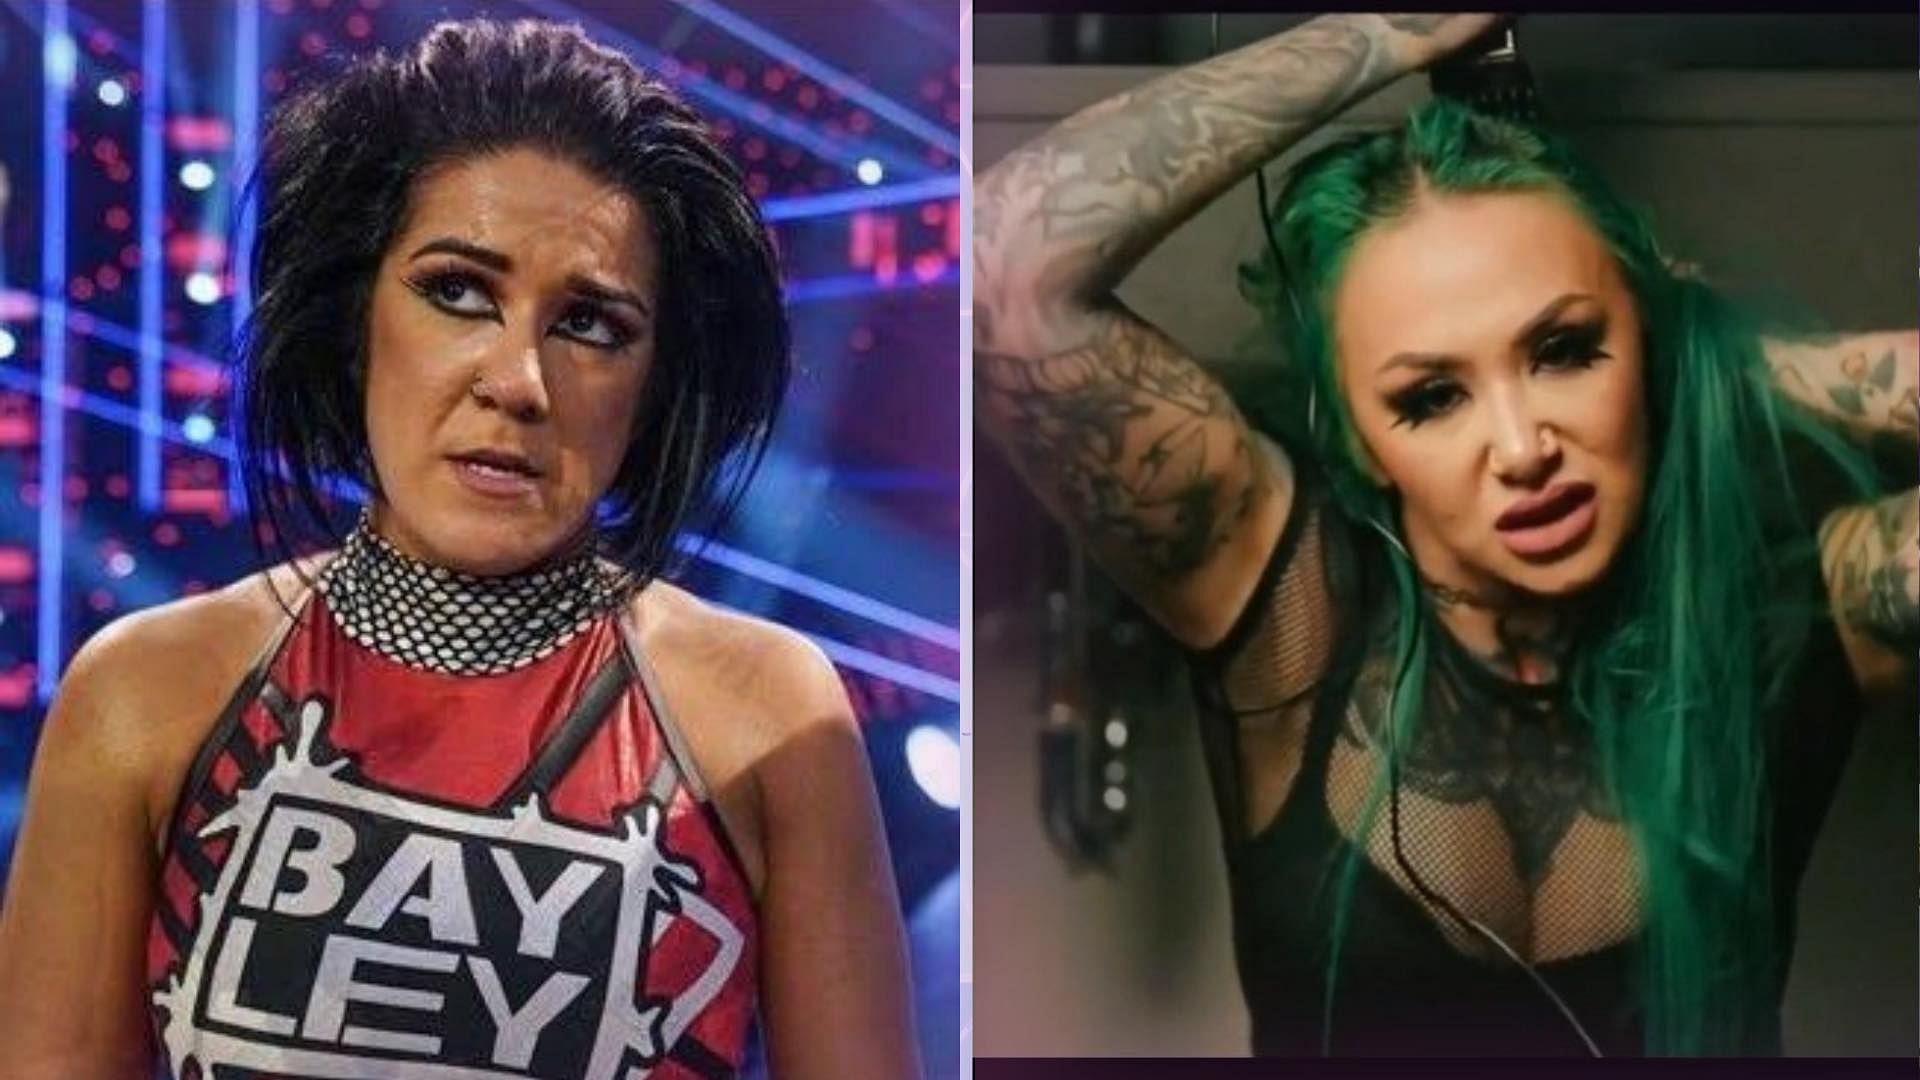 Things have heated up on WWE SmackDown between Bayley and Shotzi 